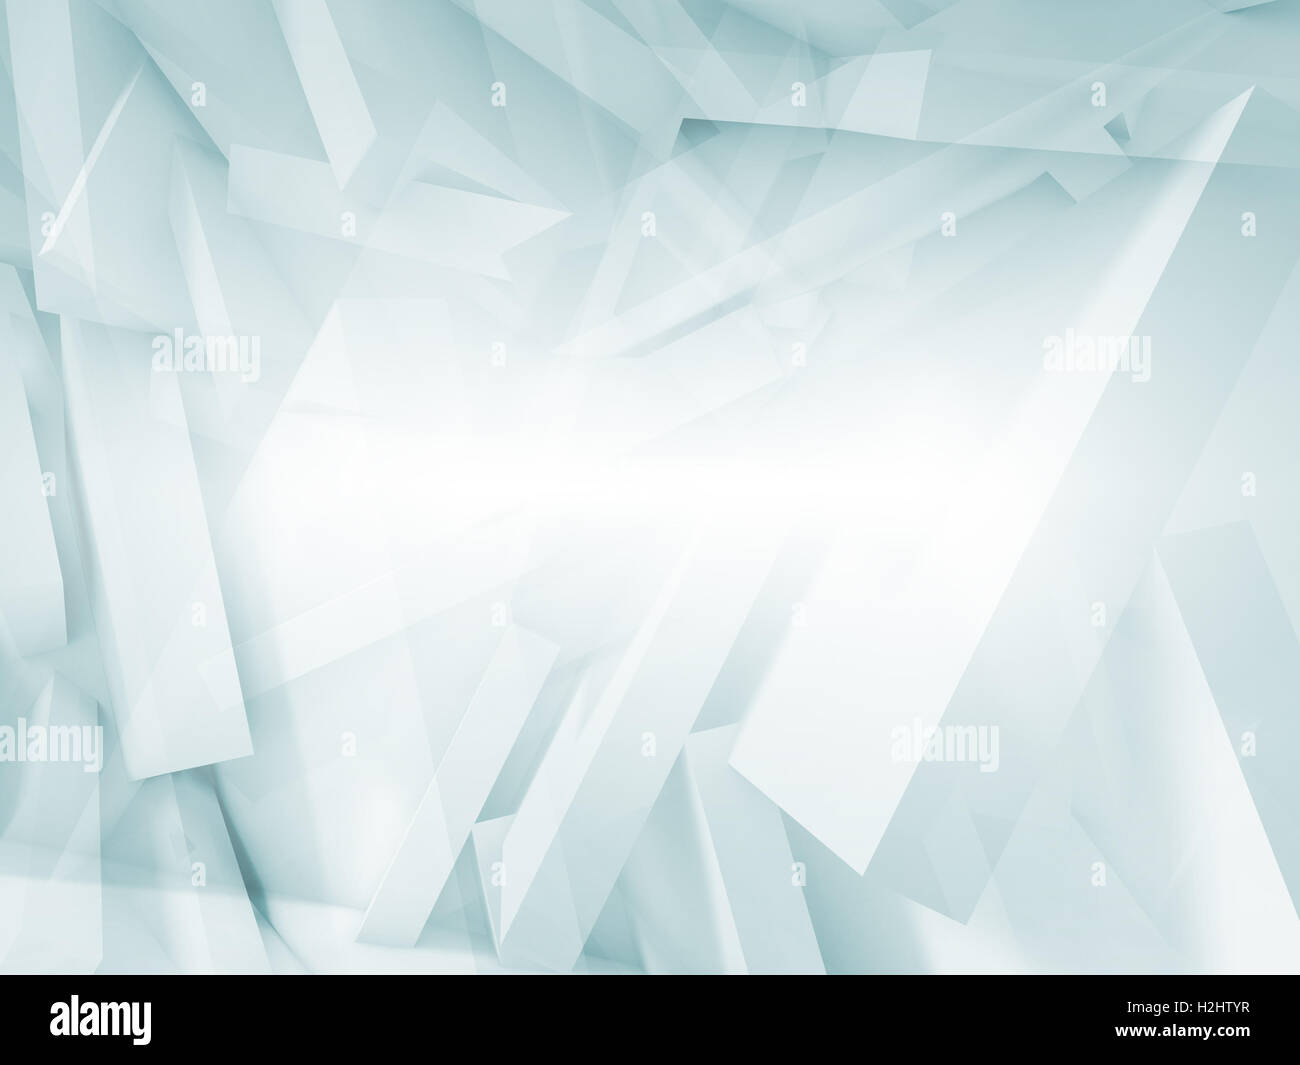 Abstract 3 d background, blue and white chaotic polygonal blocks pattern. Blue toned 3d illustration, computer graphic Stock Photo